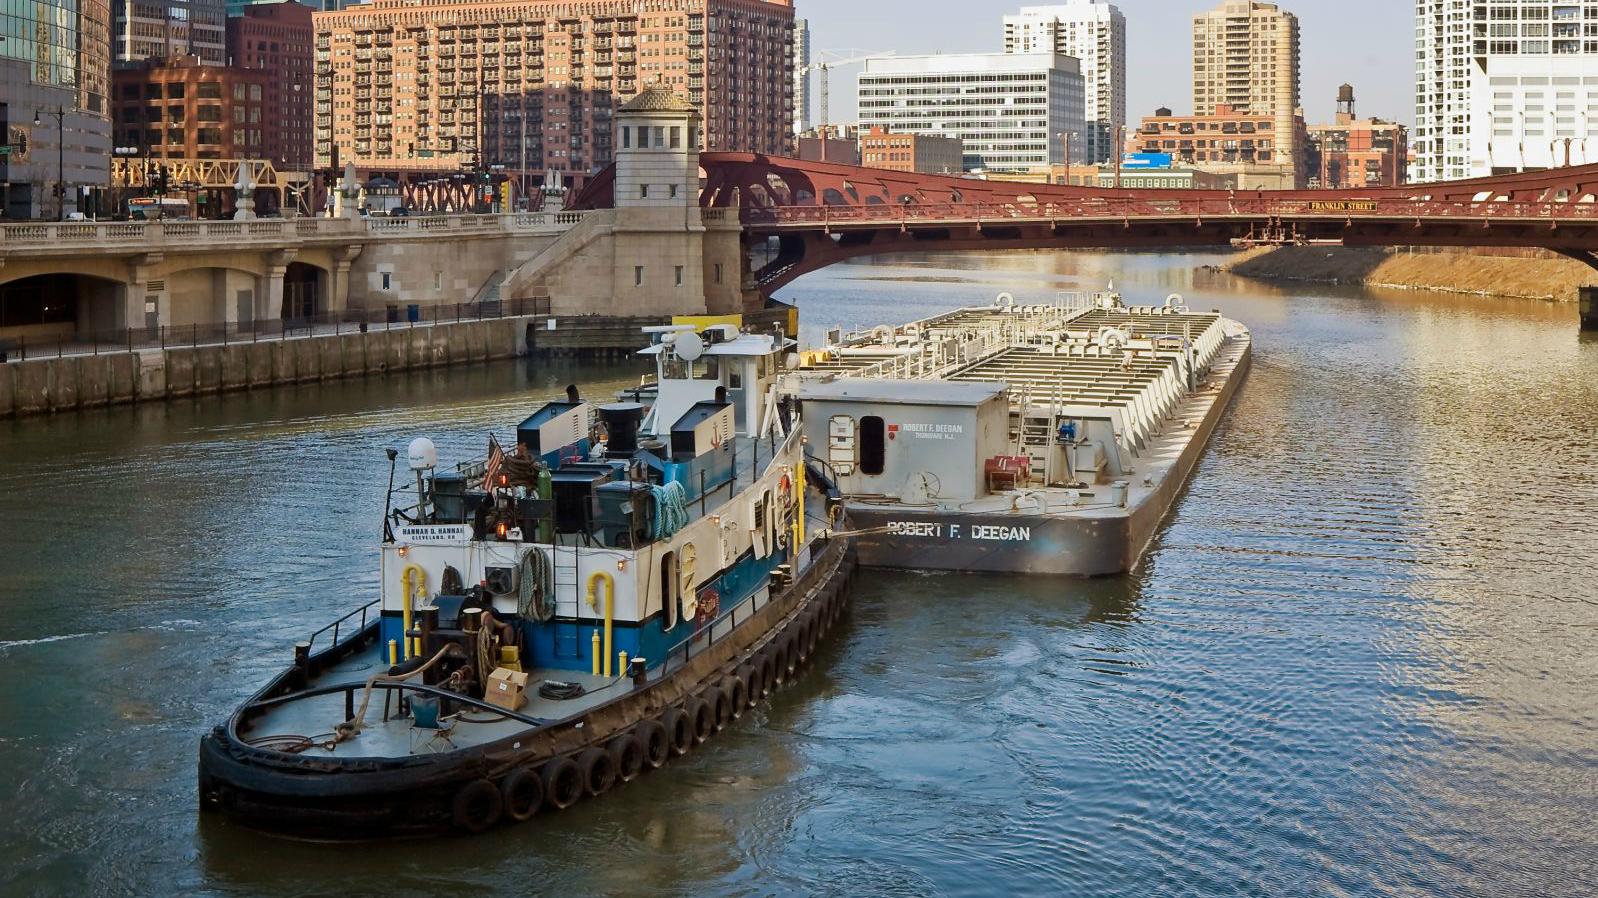 Towboat and Barge on Chicago River